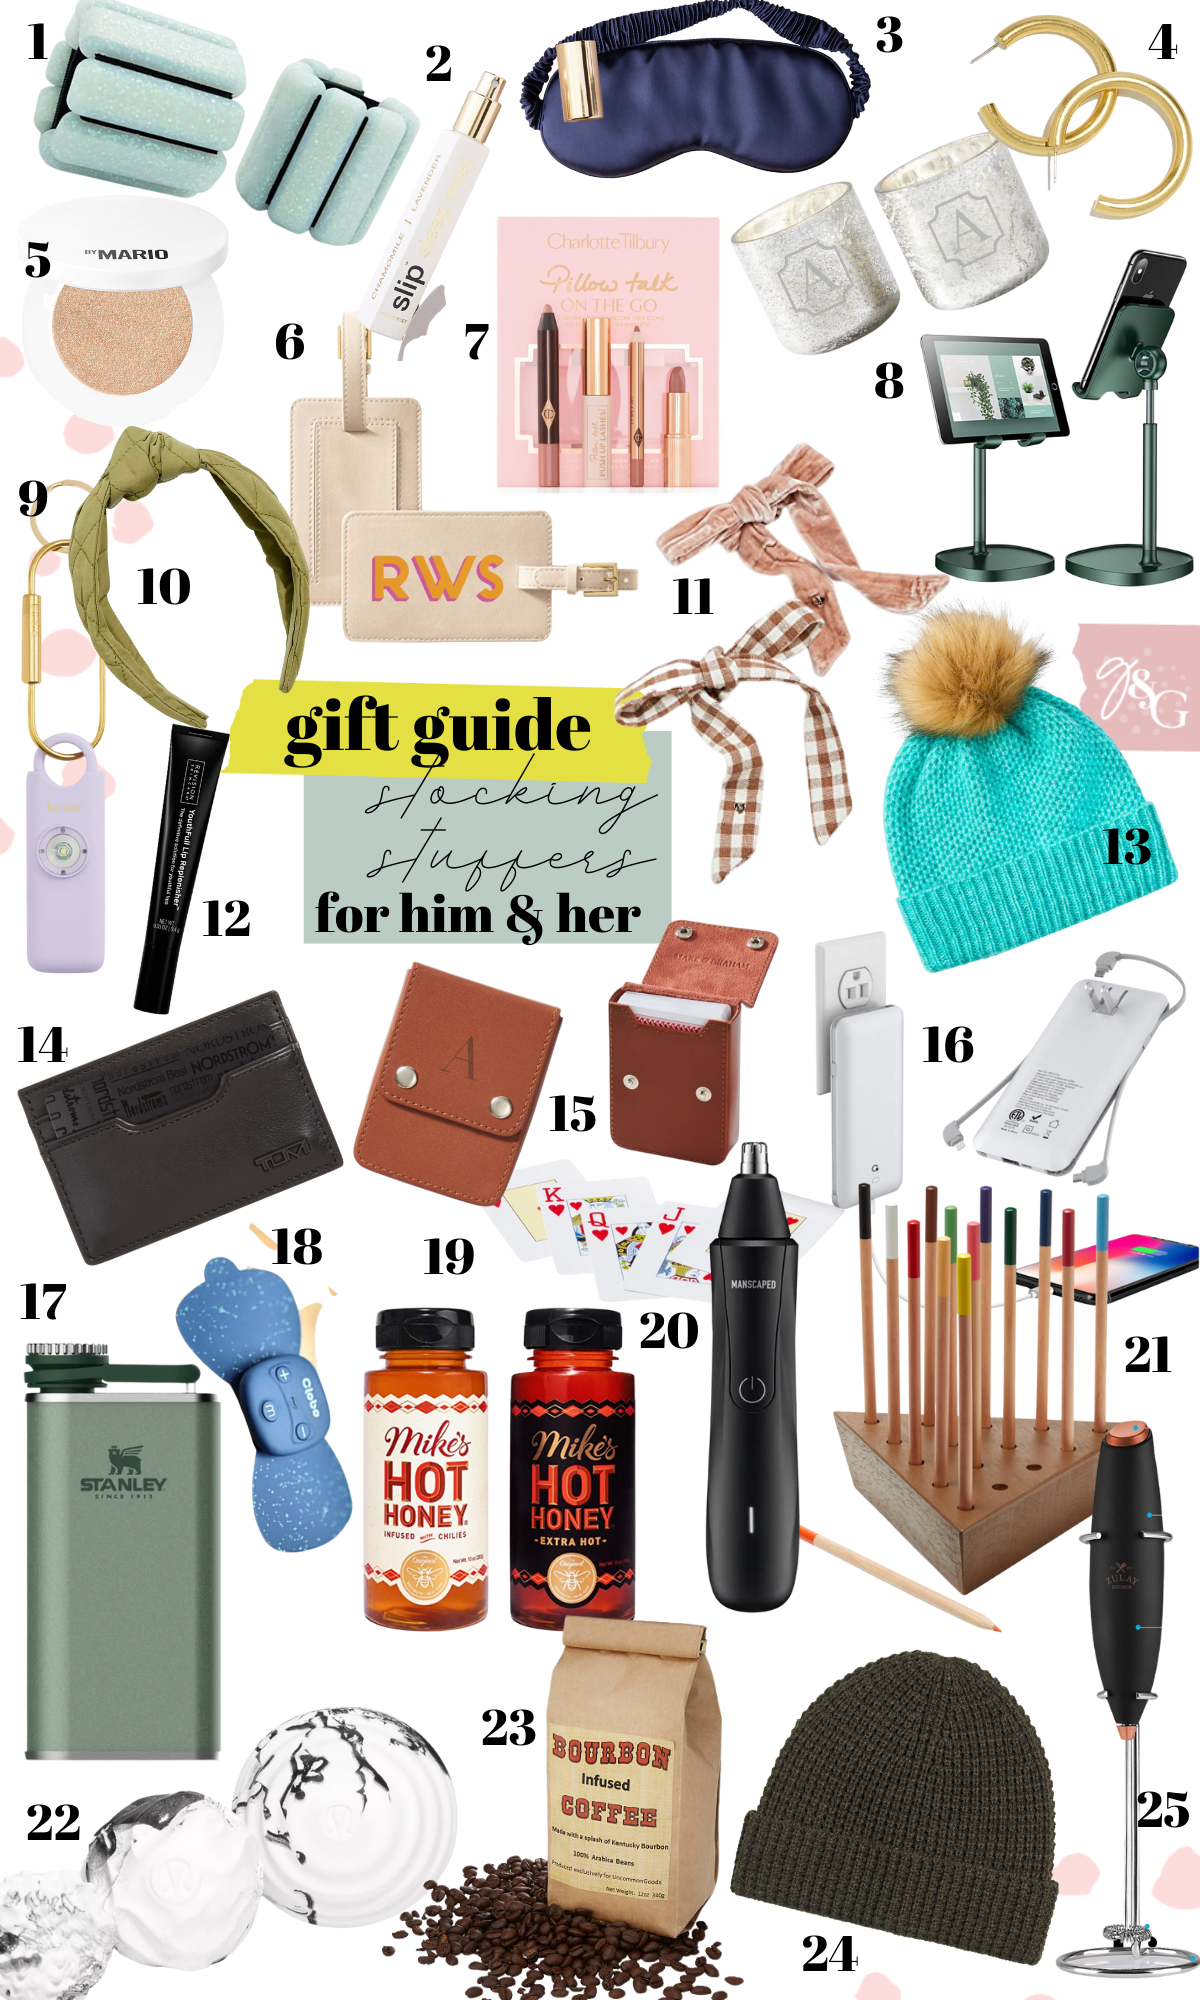 Stocking Stuffers For Him Under $15